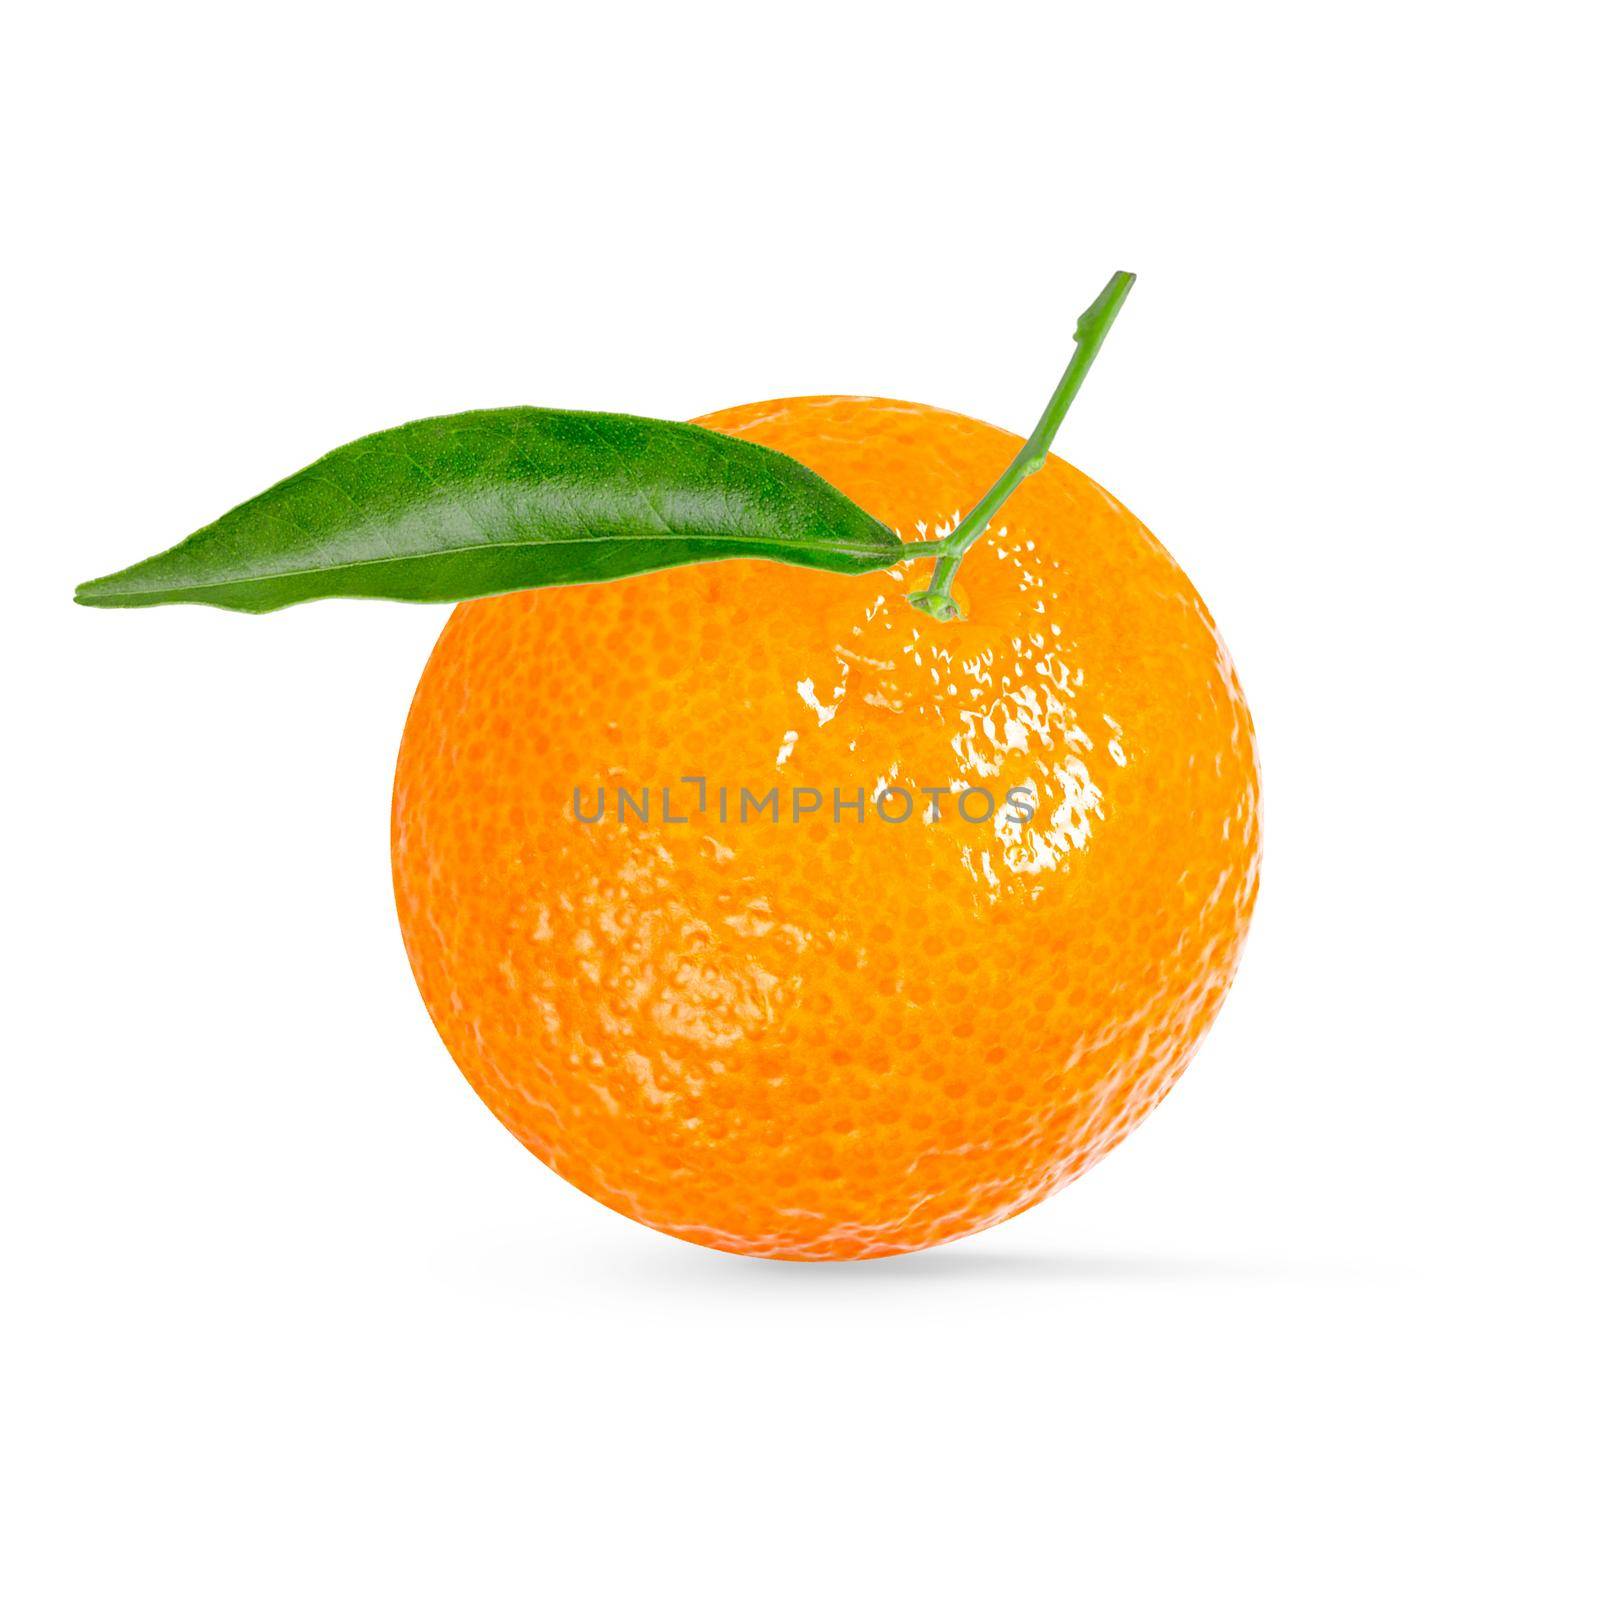 Mandarin or clementine with green leaf isolated on white background by Ciorba